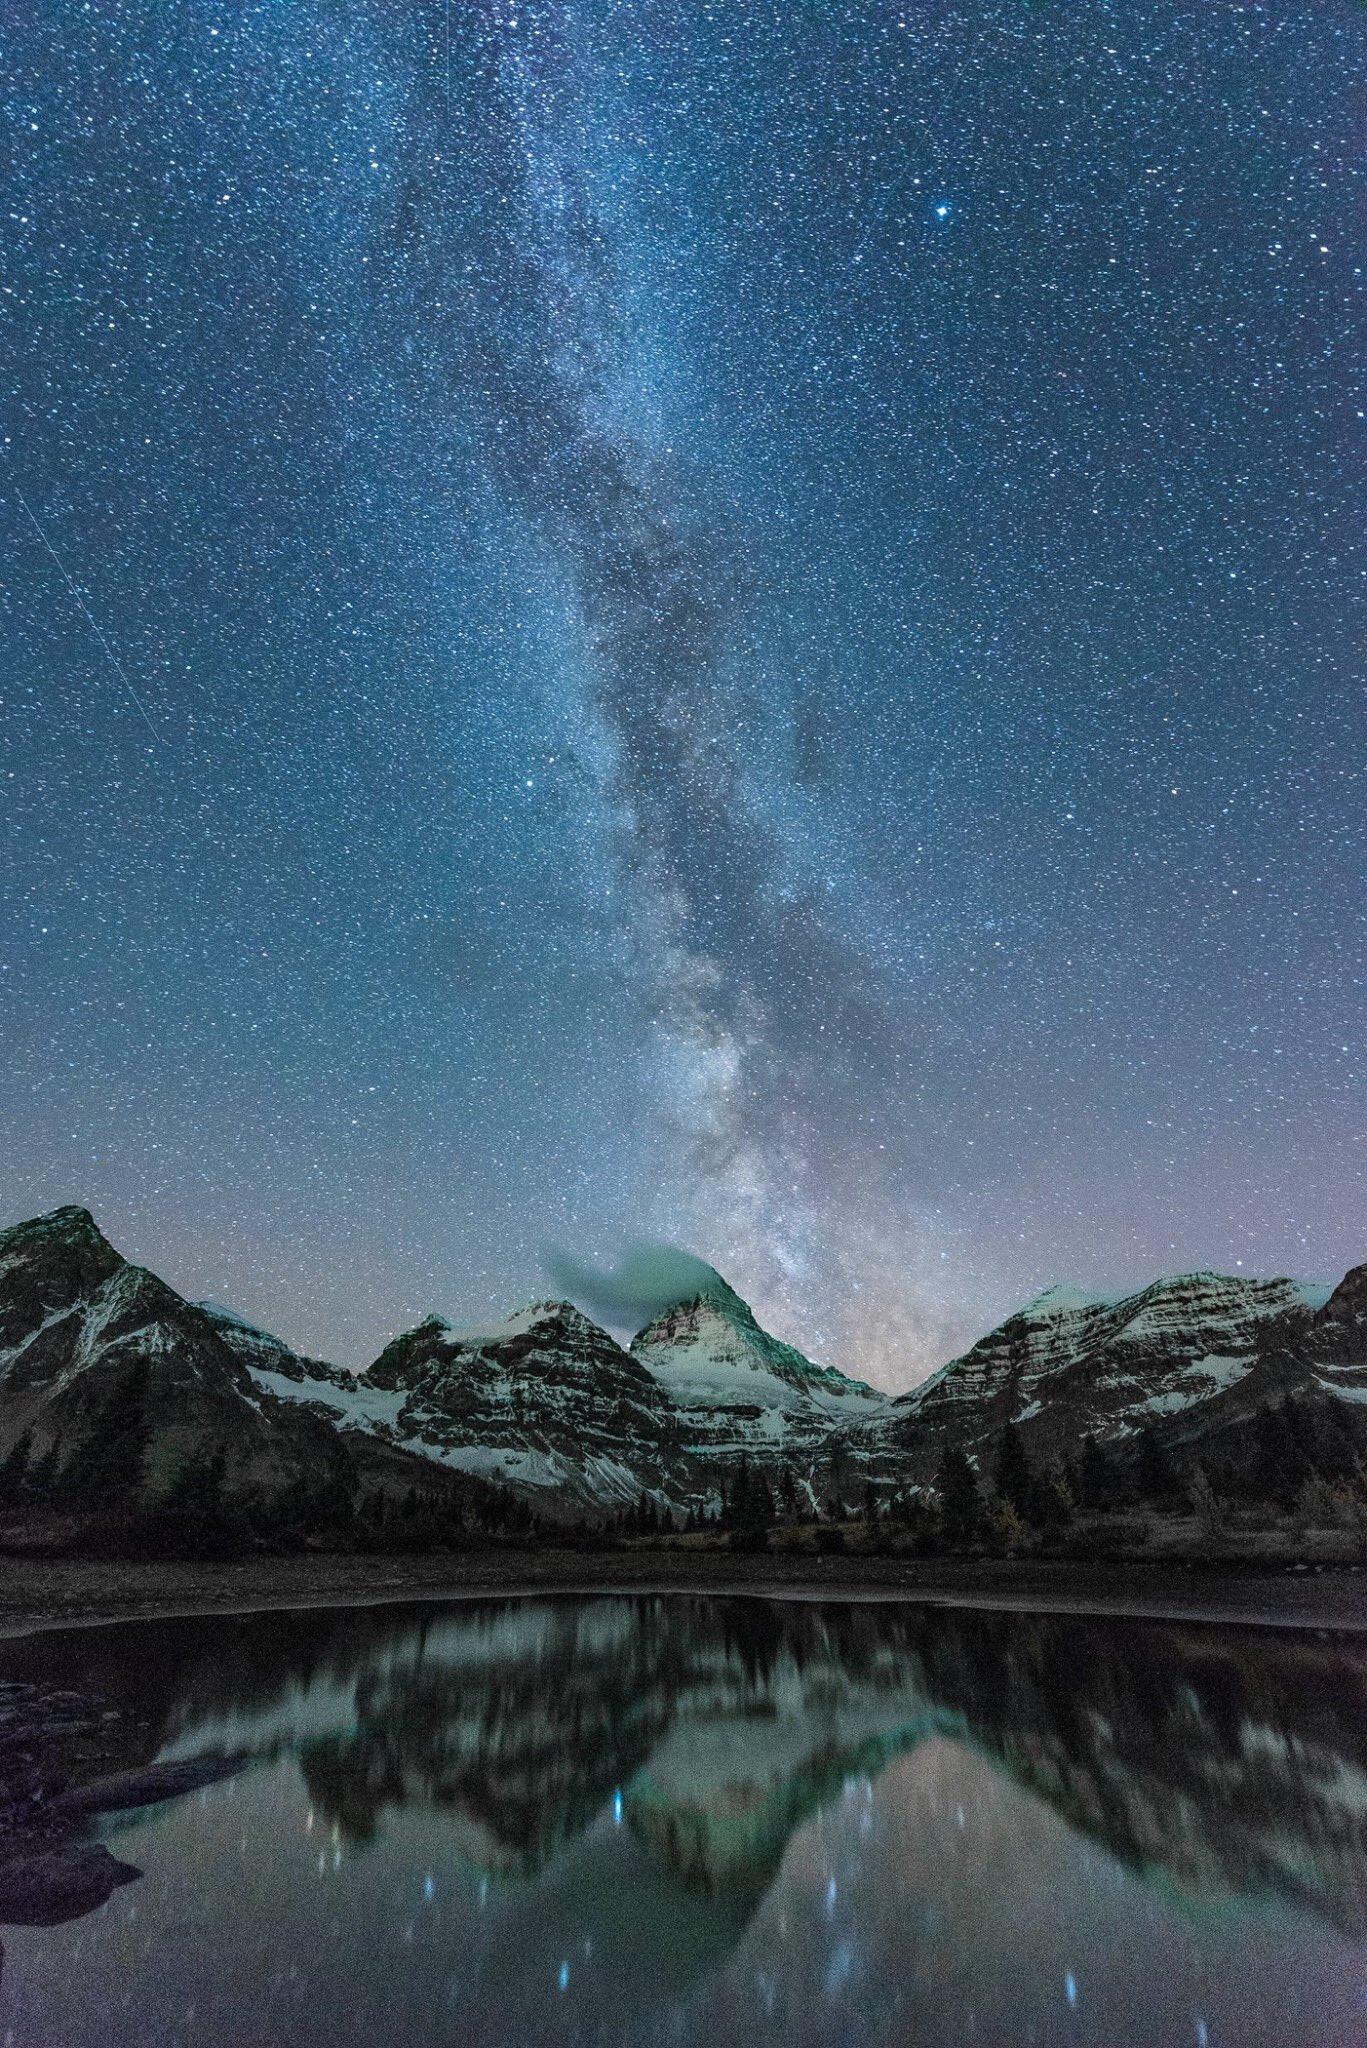 A clear alpine lake is in the foreground with snowy mountain peaks behind. Straight up from the peaks in the centre of the frame is the Milky Way in a star-filled sky.